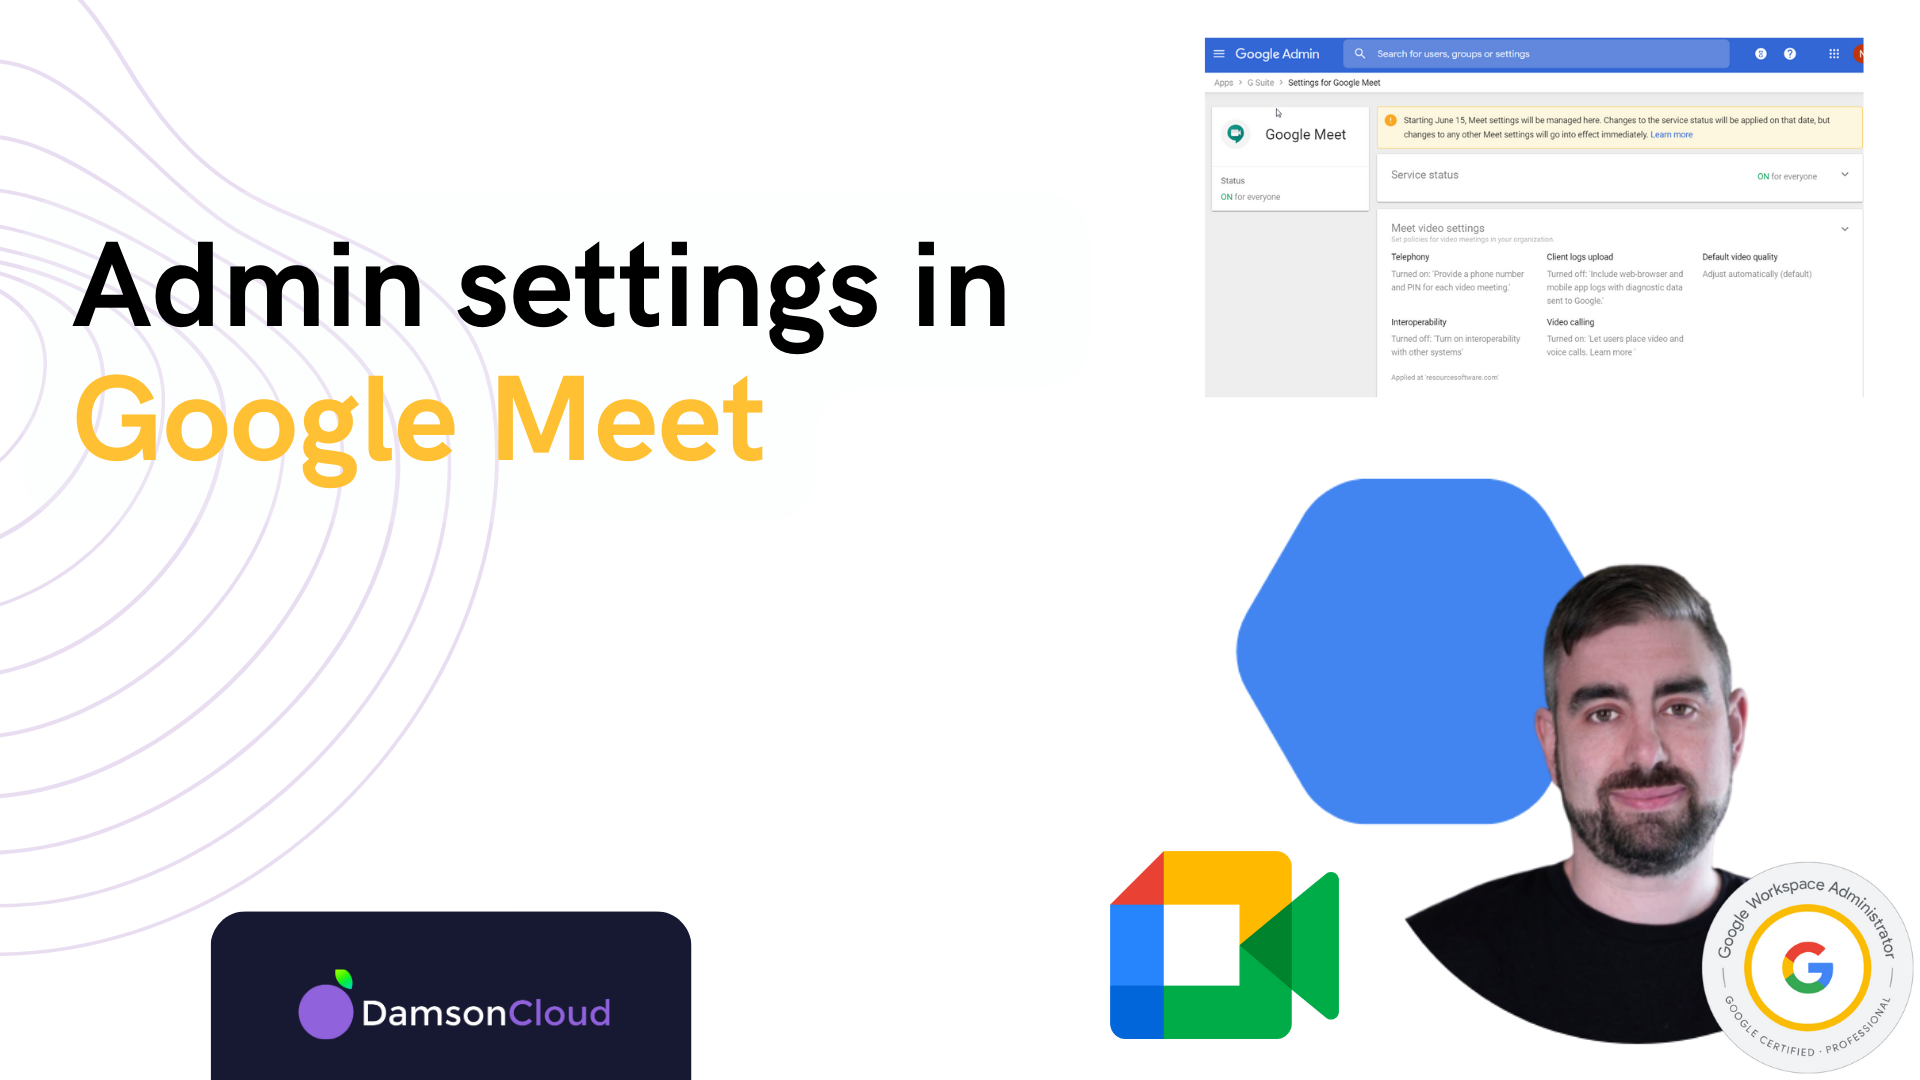 <strong>How to Manage Settings in Google Meet for Admins</strong>